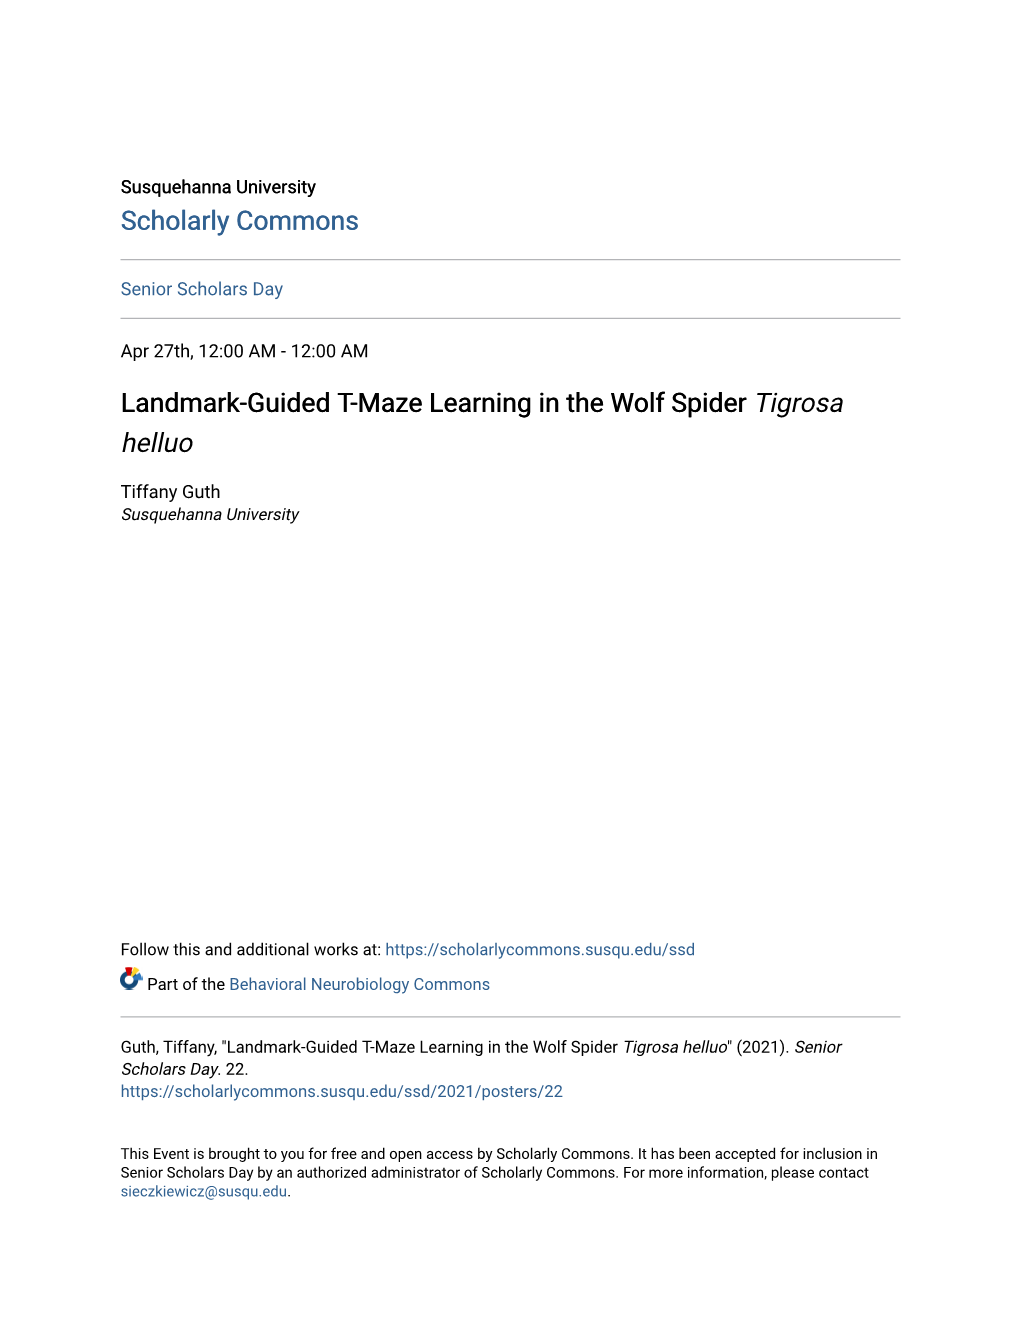 Landmark-Guided T-Maze Learning in the Wolf Spider Tigrosa Helluo